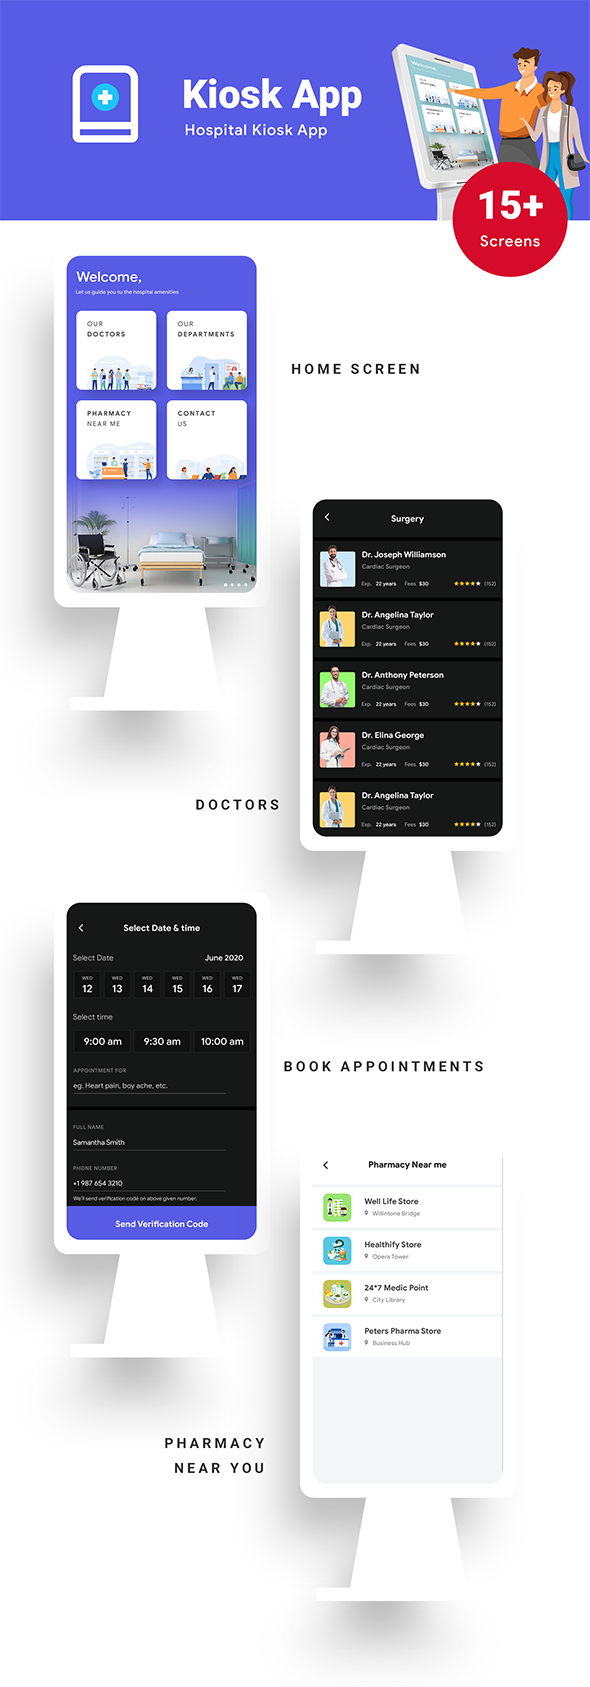 17 Template| Doctor Appointment Booking| Hospital management POS system| Medicine Delivery| Doctopro - 18